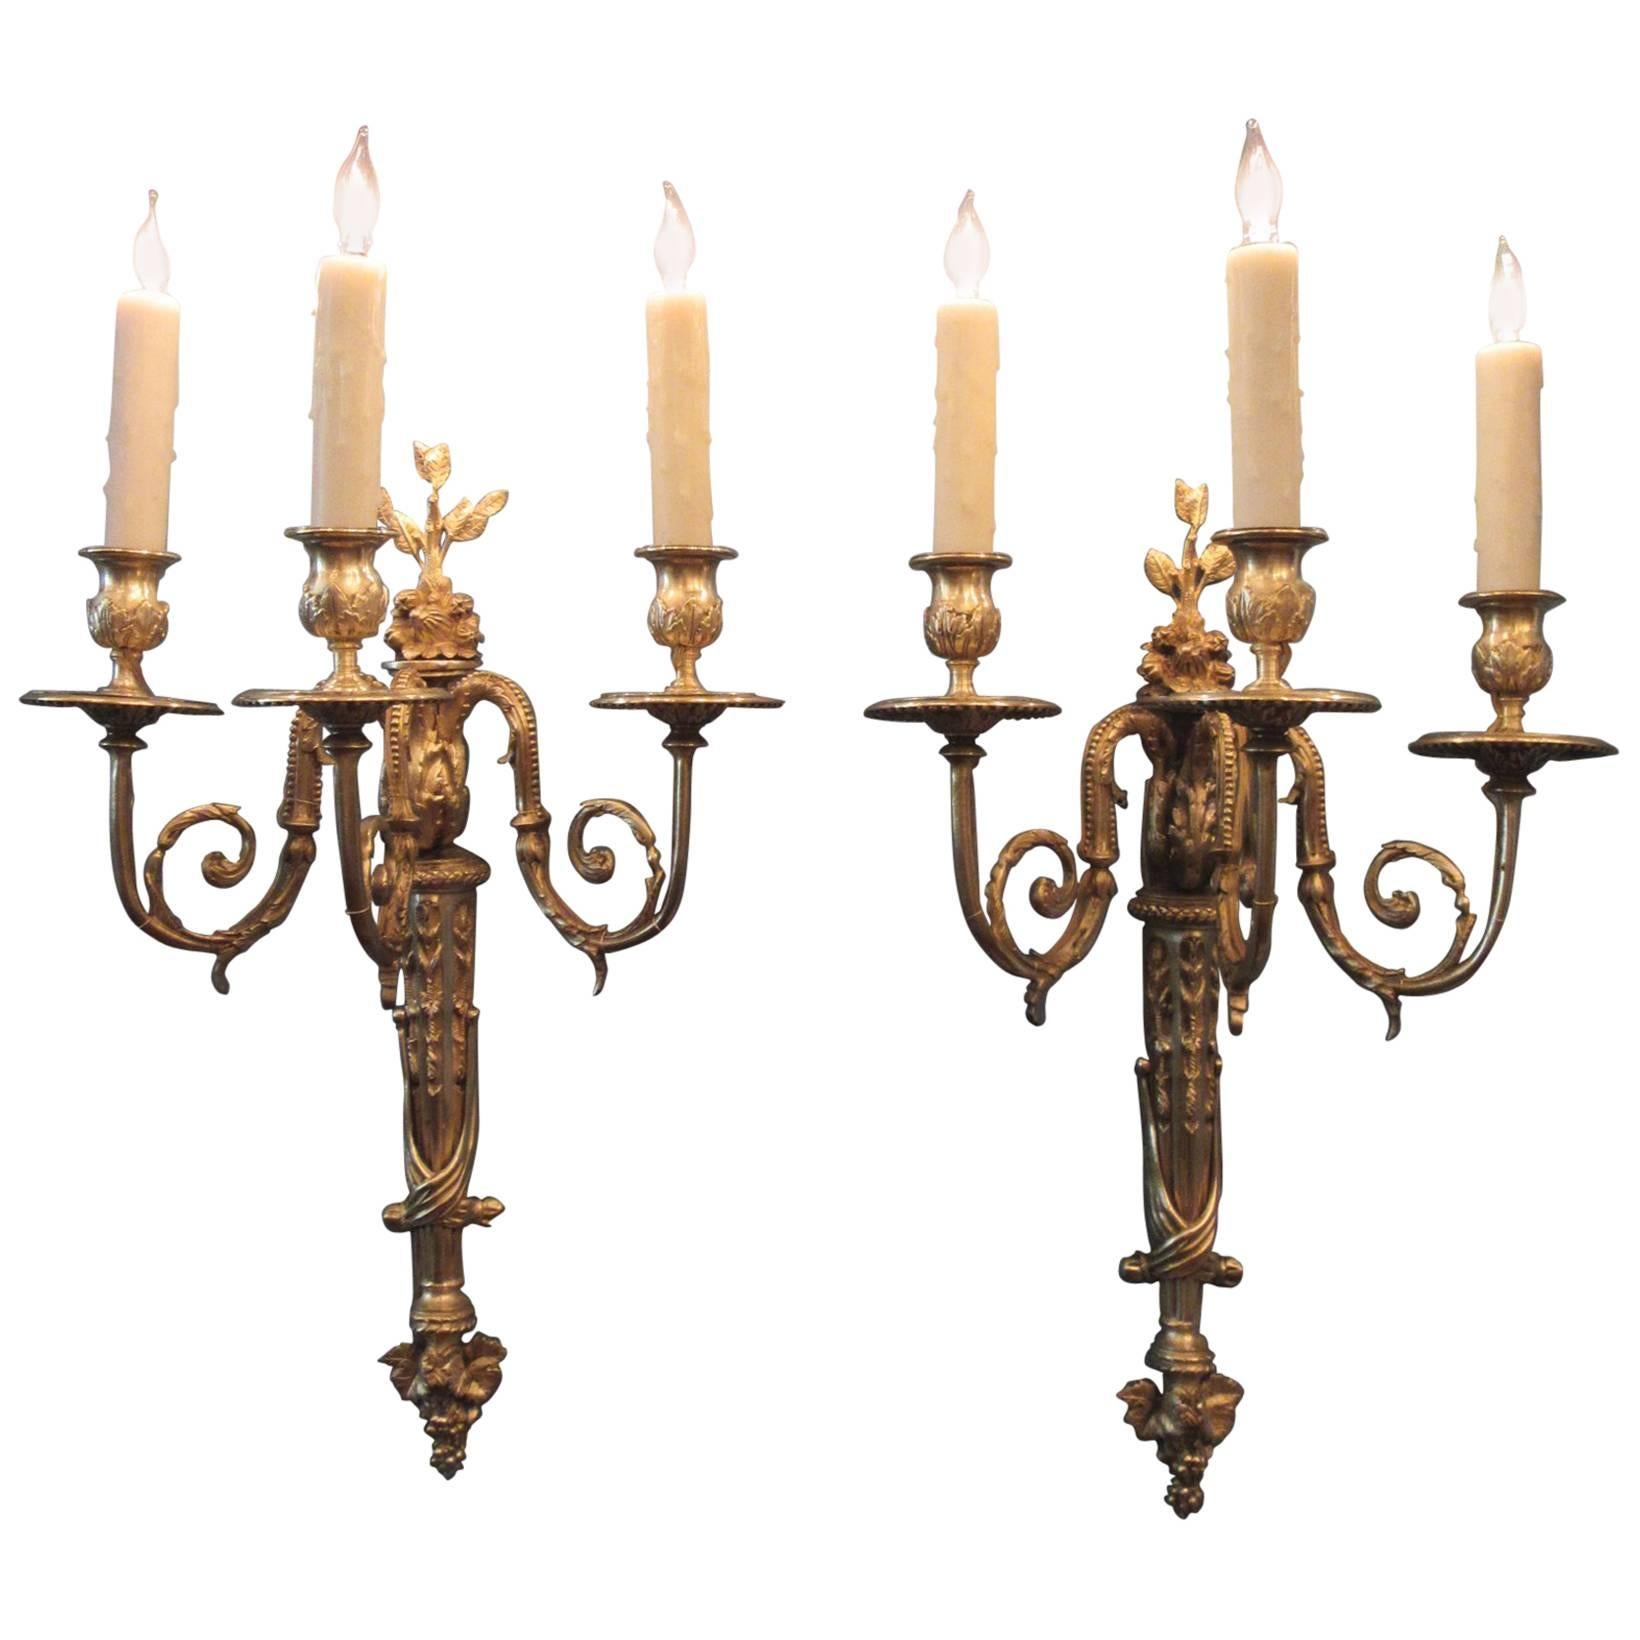 Pair of Early 19th Century French Regence Bronze Dore Sconces with Grapes For Sale